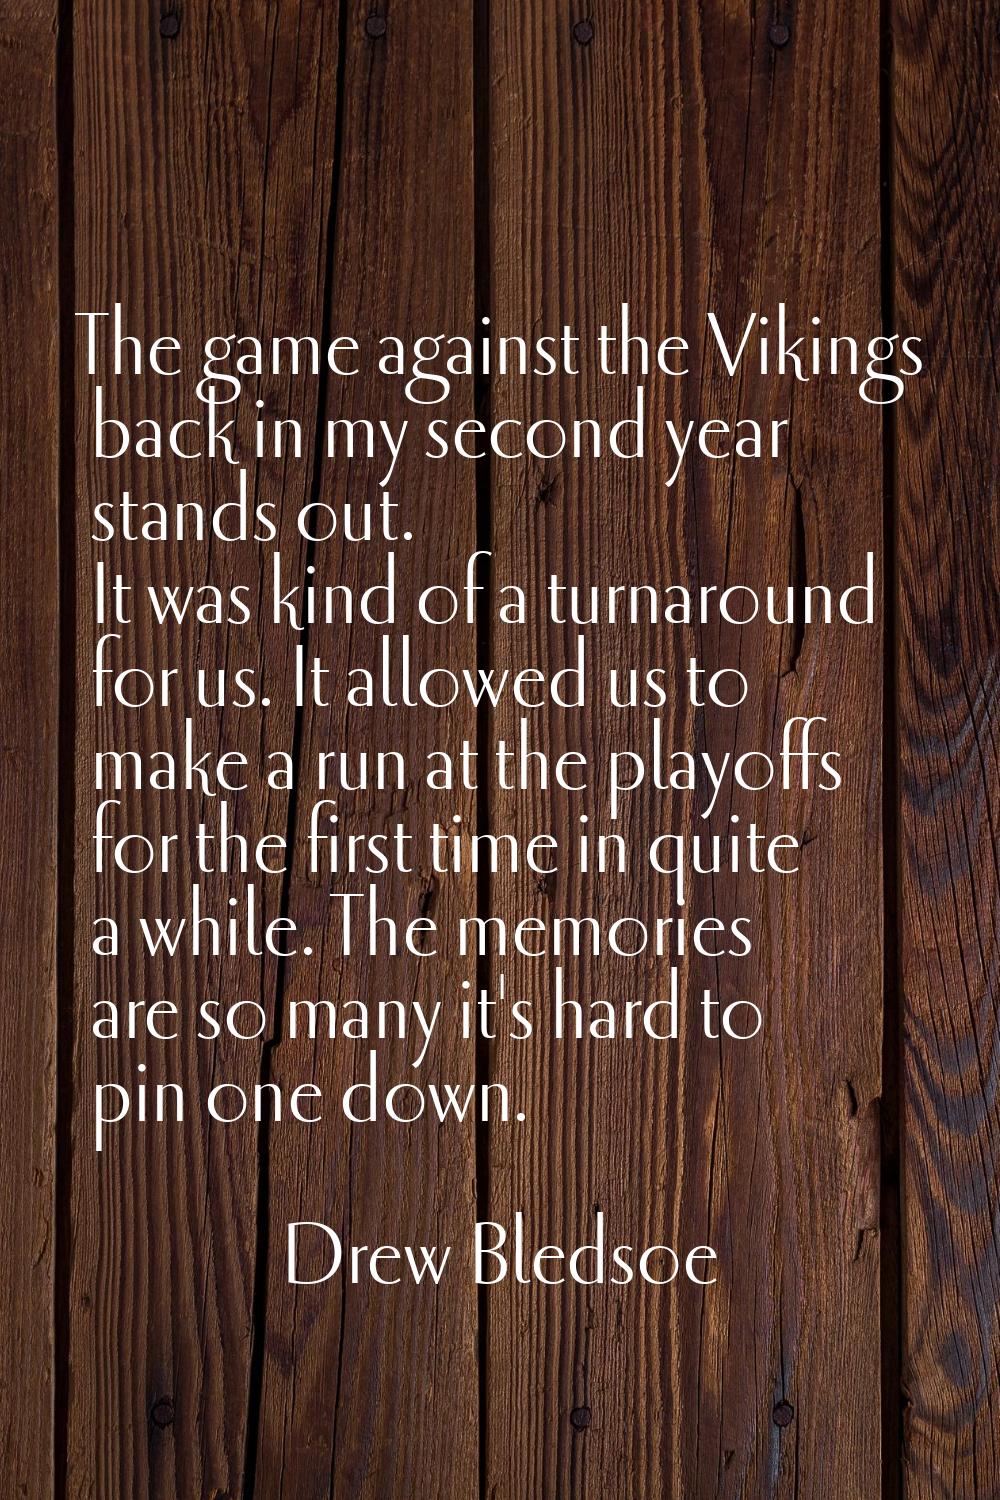 The game against the Vikings back in my second year stands out. It was kind of a turnaround for us.